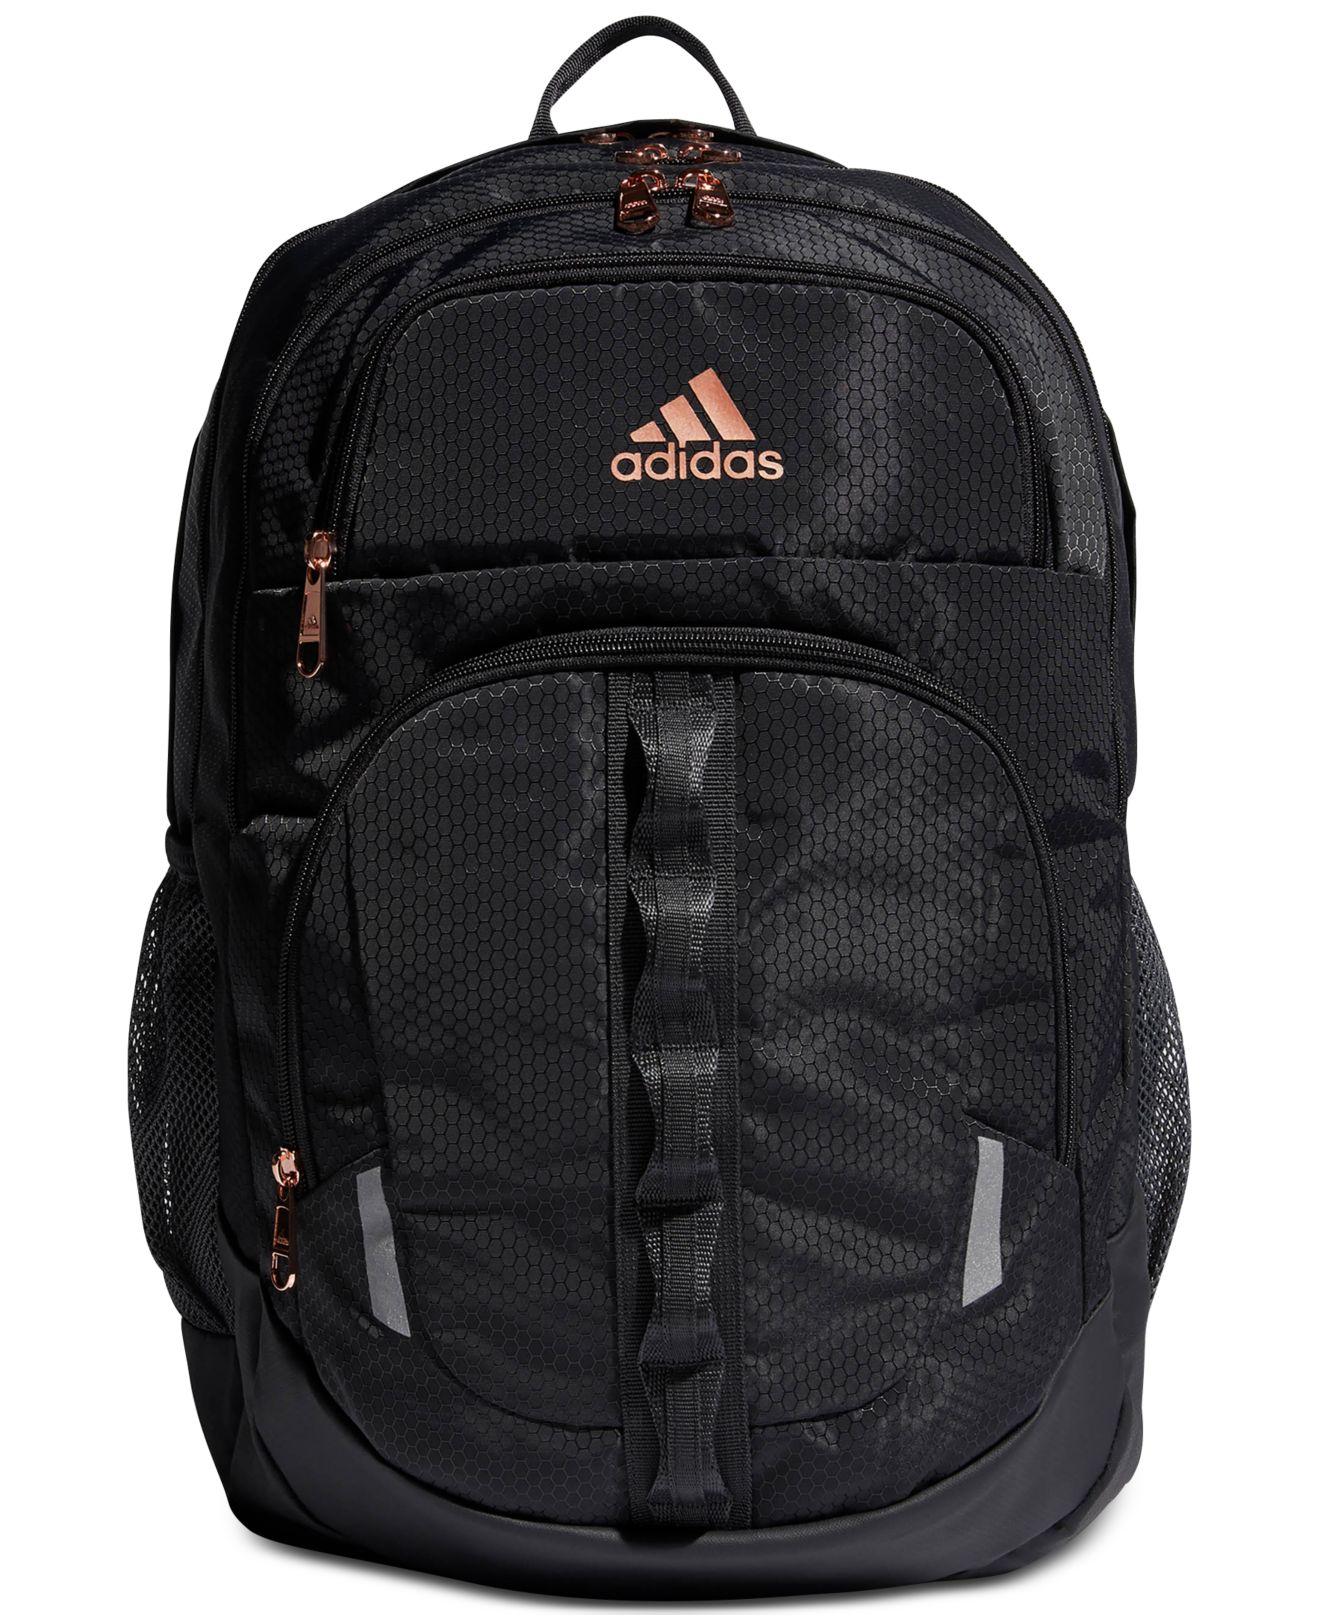 adidas Synthetic Prime Backpack in Carbon/Rose Gold (Black) for Men - Lyst